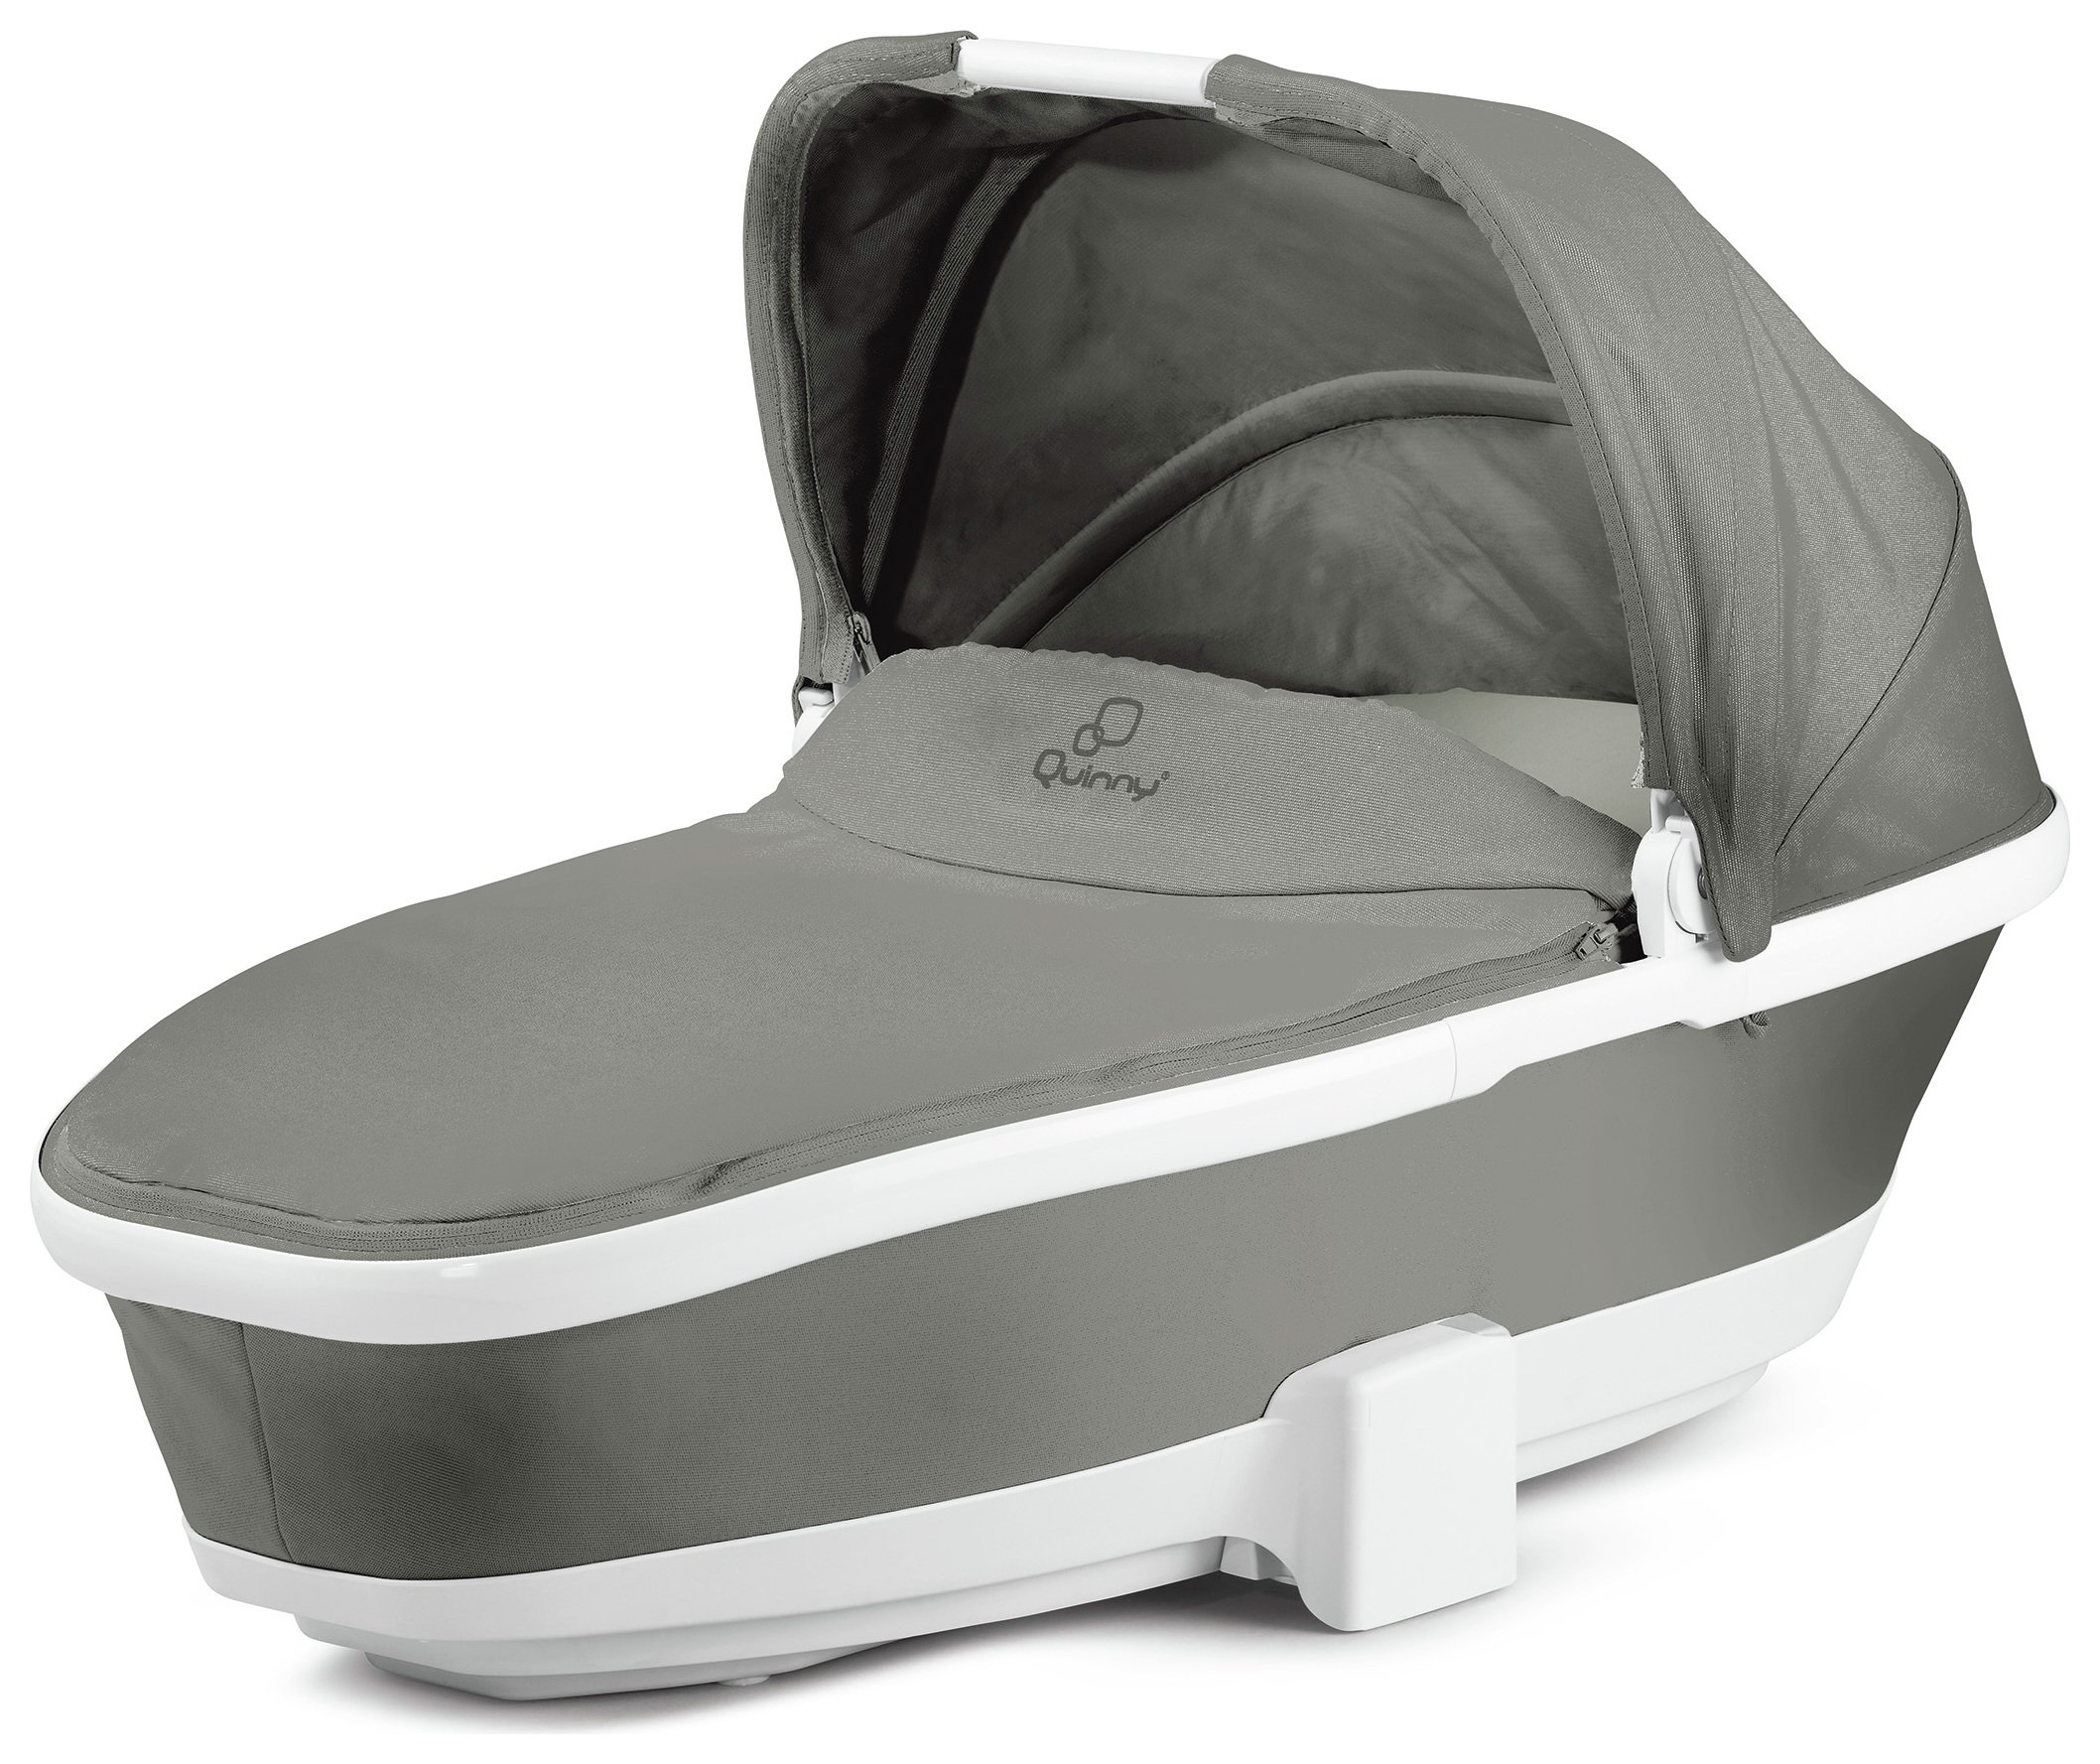 Quinny Foldable Carrycot - Grey Gravel